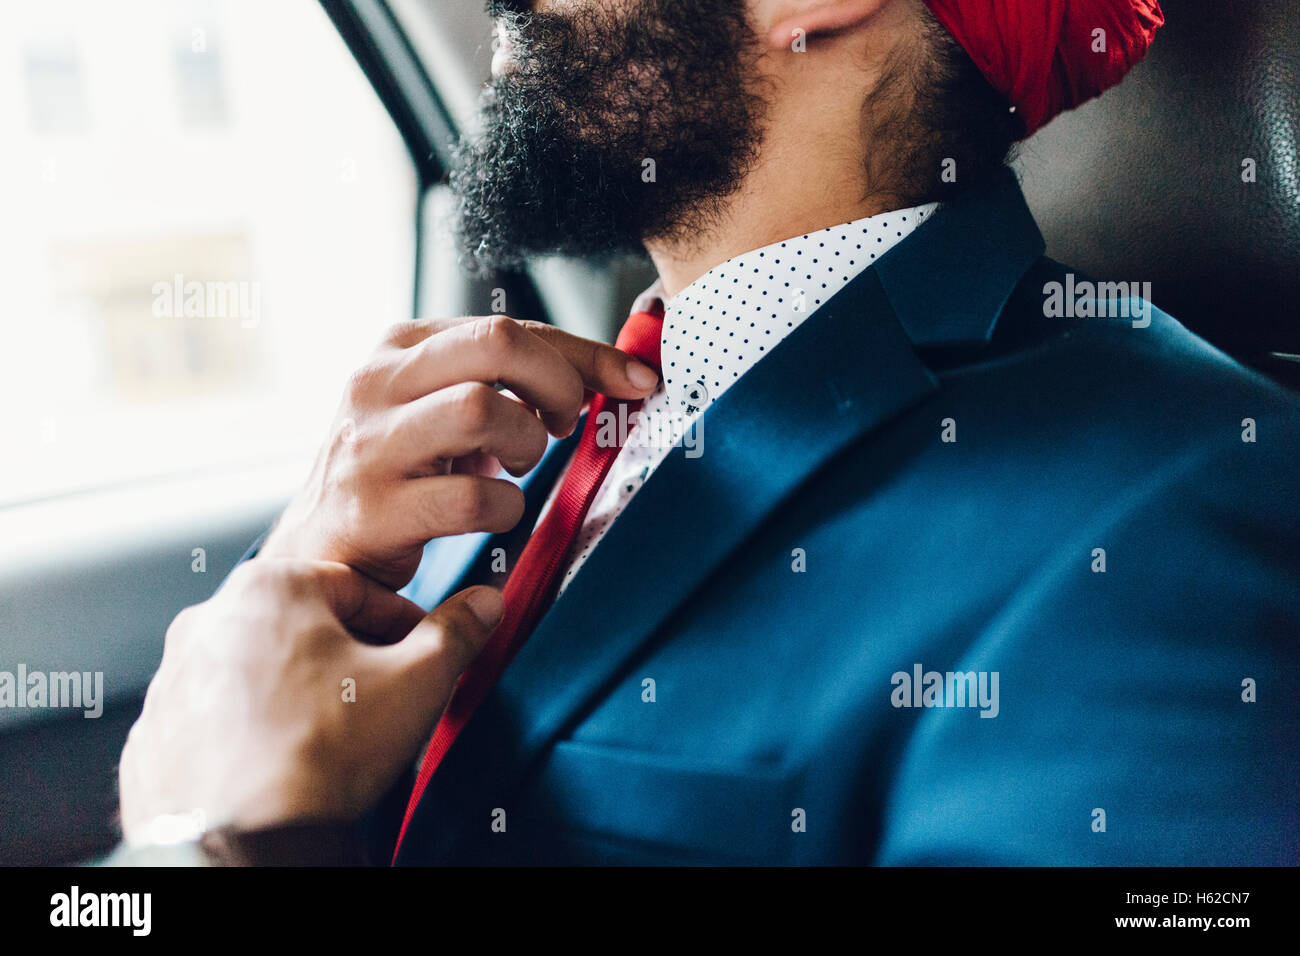 Indian businessman binding tie in a taxi Stock Photo